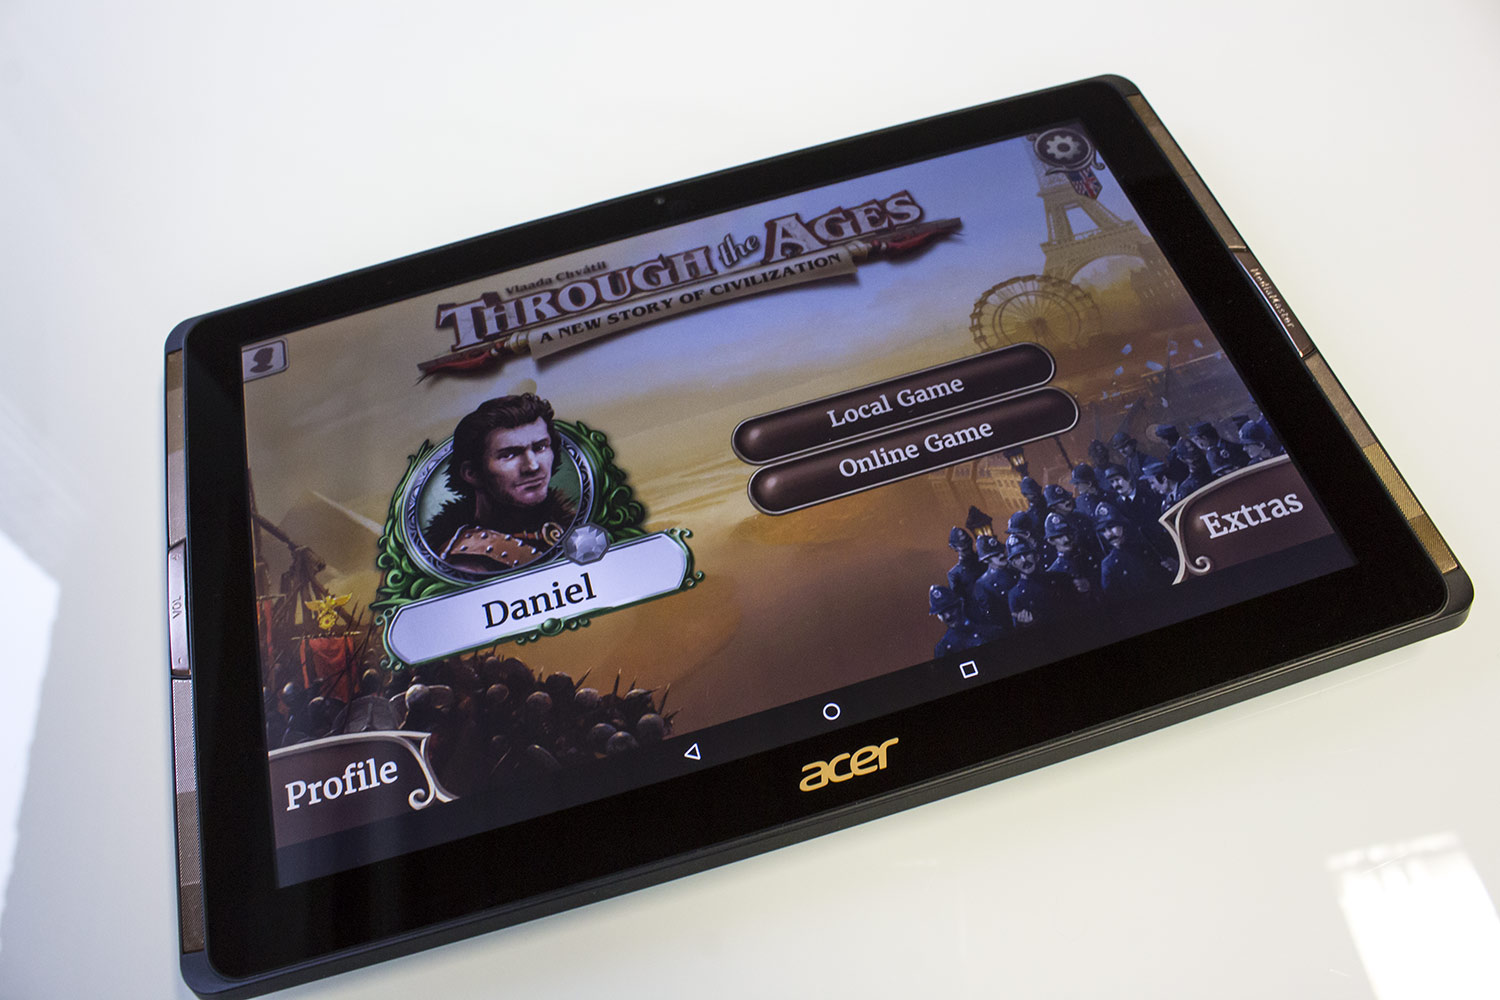 Through the Ages als Android-App - erster Eindruck